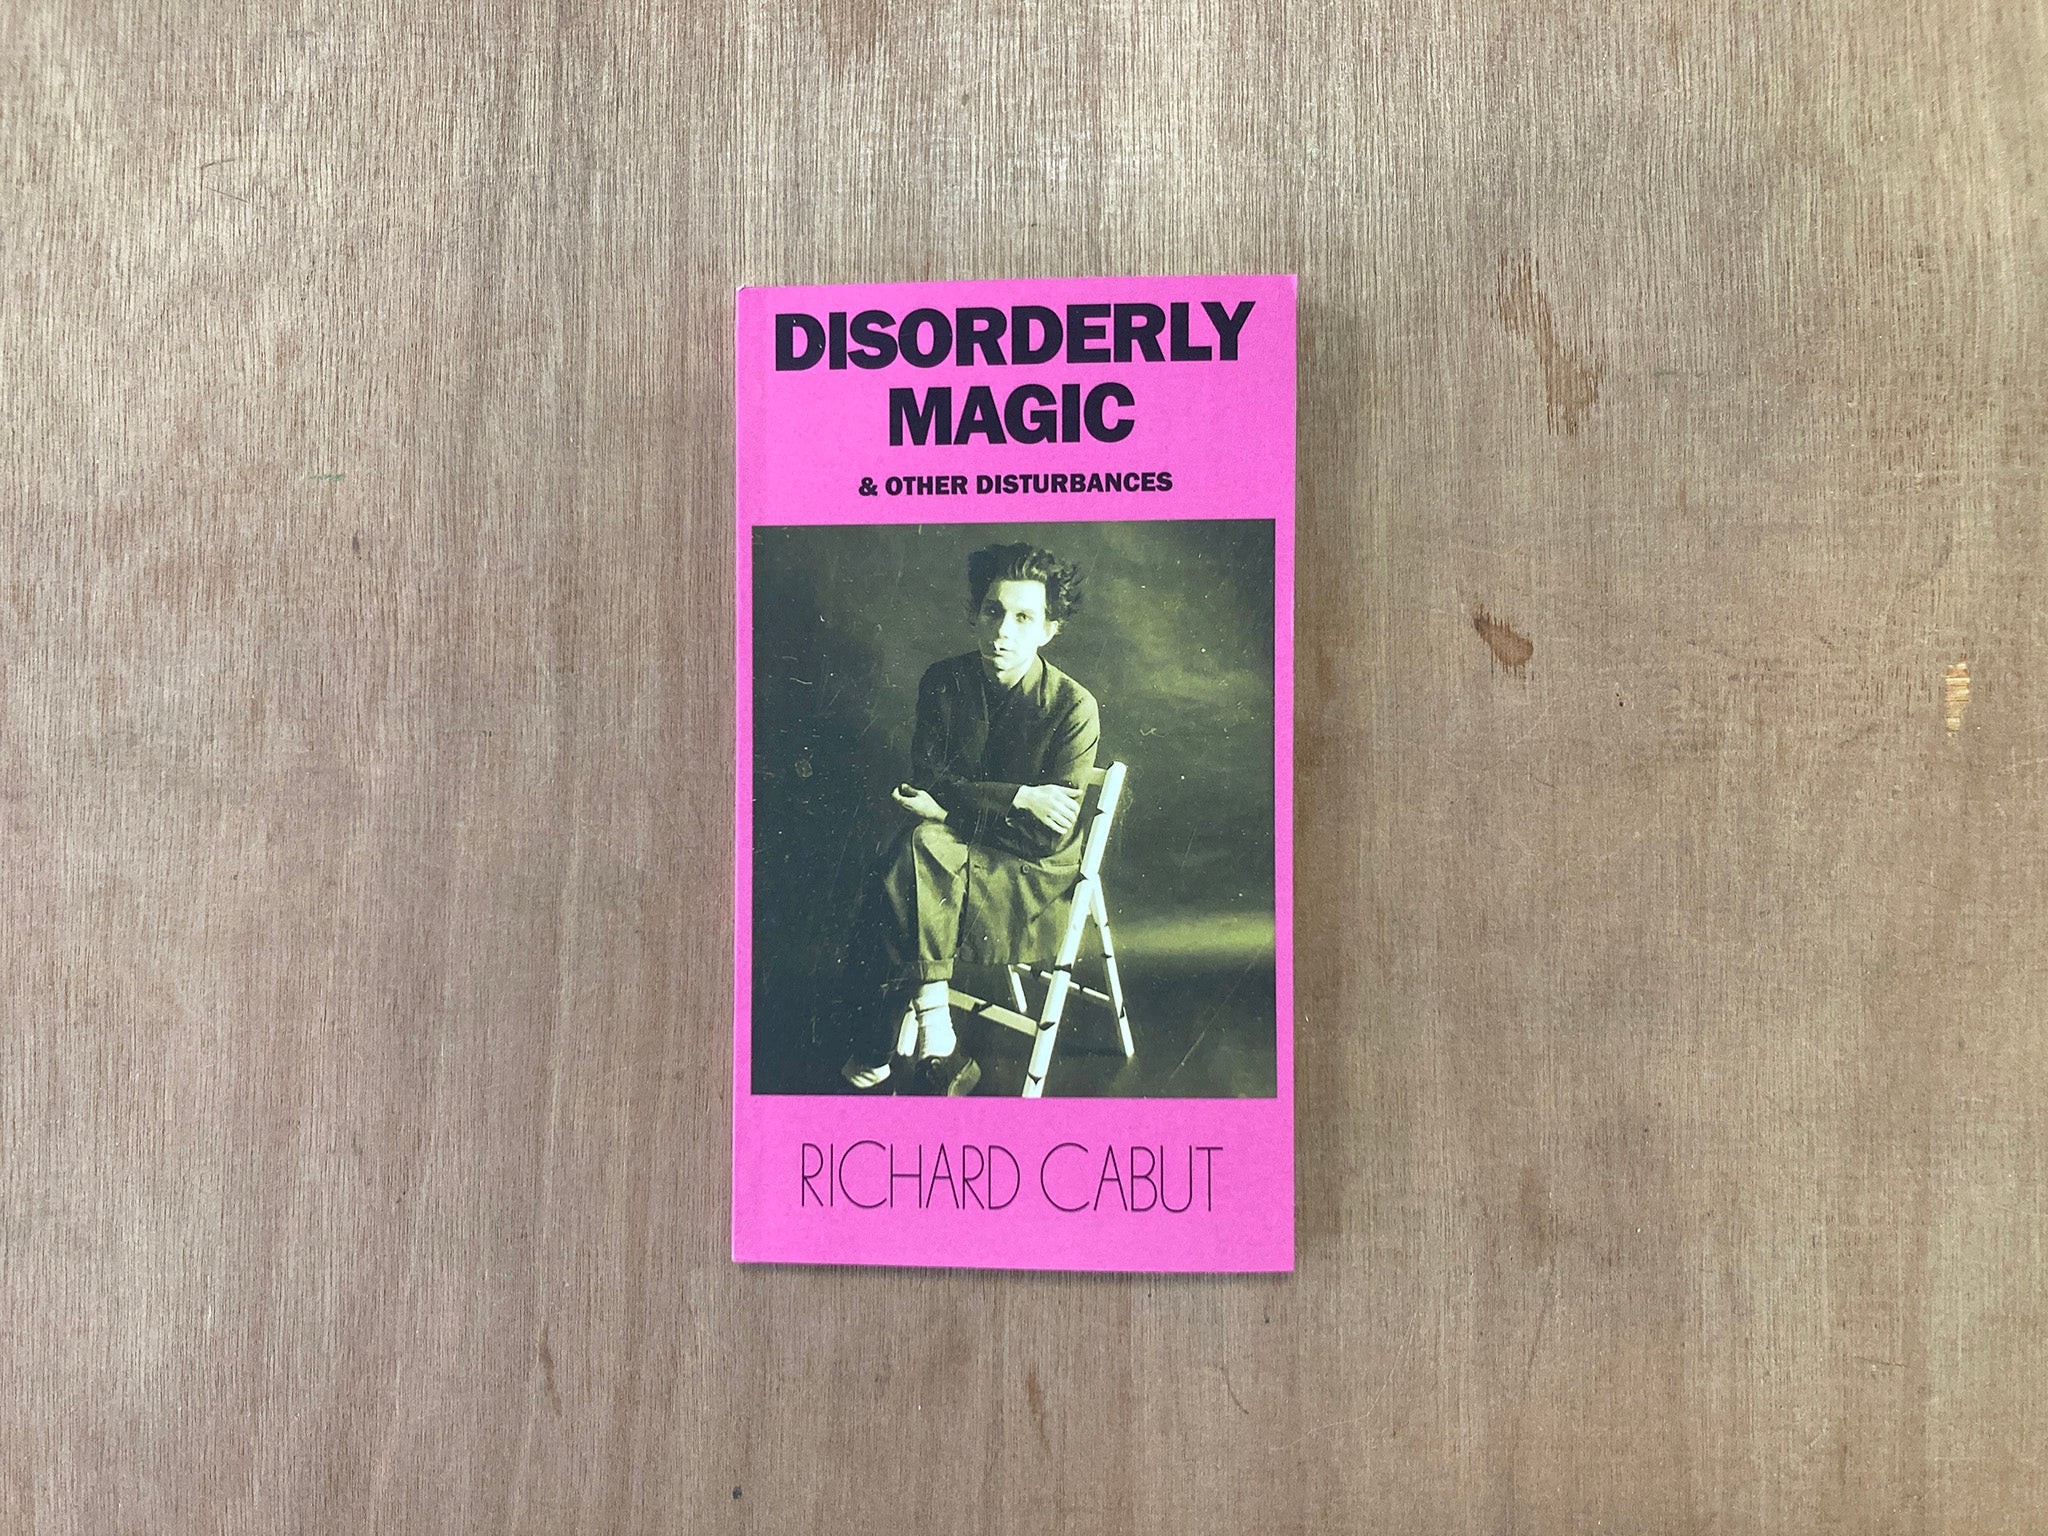 DISORDERLY MAGIC AND OTHER DISTURBANCES by Richard Cabut